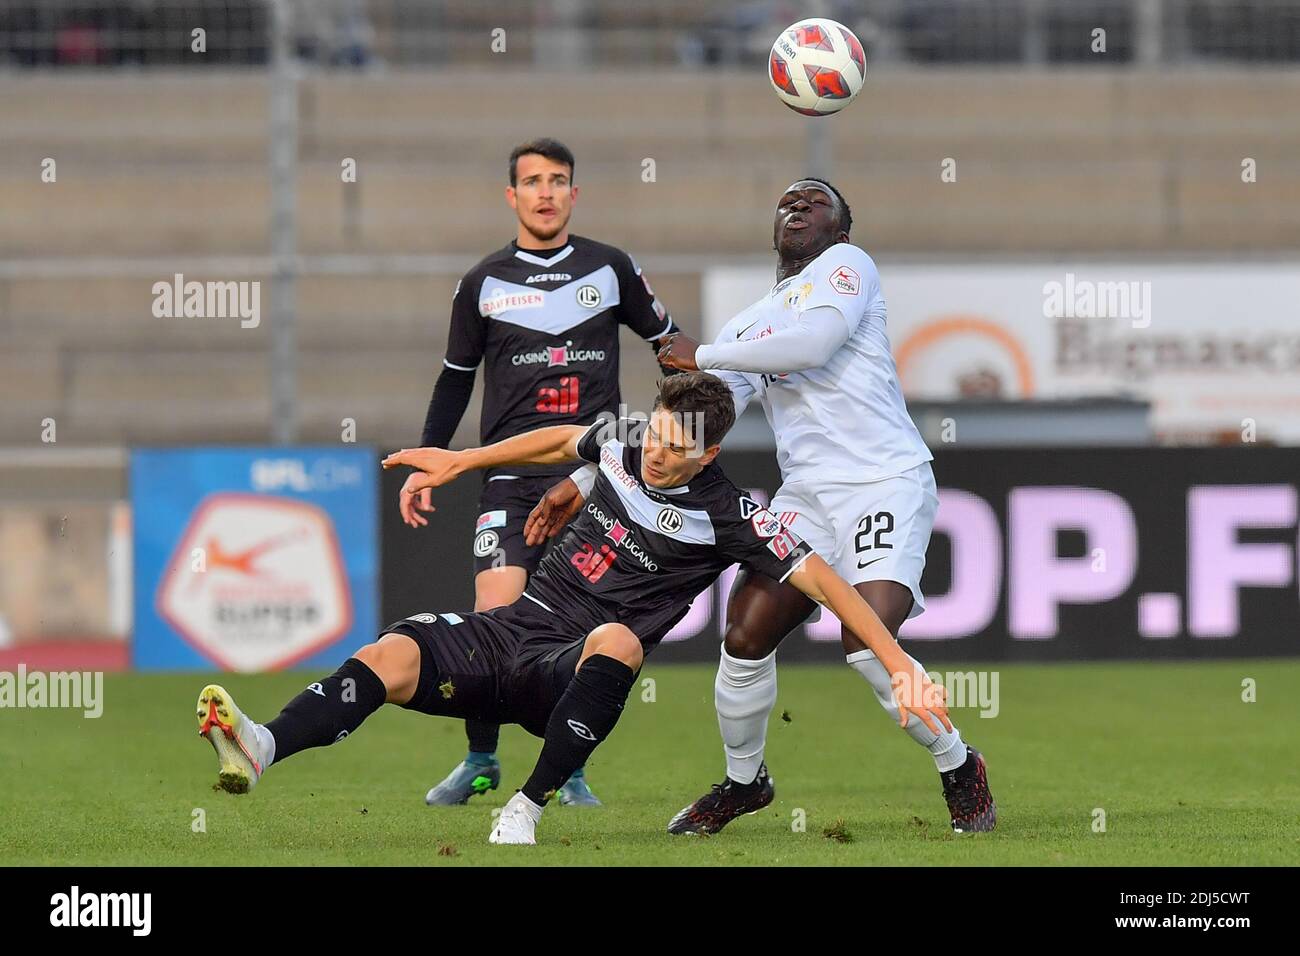 Lugano, Switzerland. 13th Dec, 2020. Stefano Guidotti (#22 FC Lugano) and Wilfried Gnonto (#22 Zurich) in action during the Swiss Super League match between FC Lugano and FC Zürich Cristiano Mazzi/SPP Credit: SPP Sport Press Photo. /Alamy Live News Stock Photo